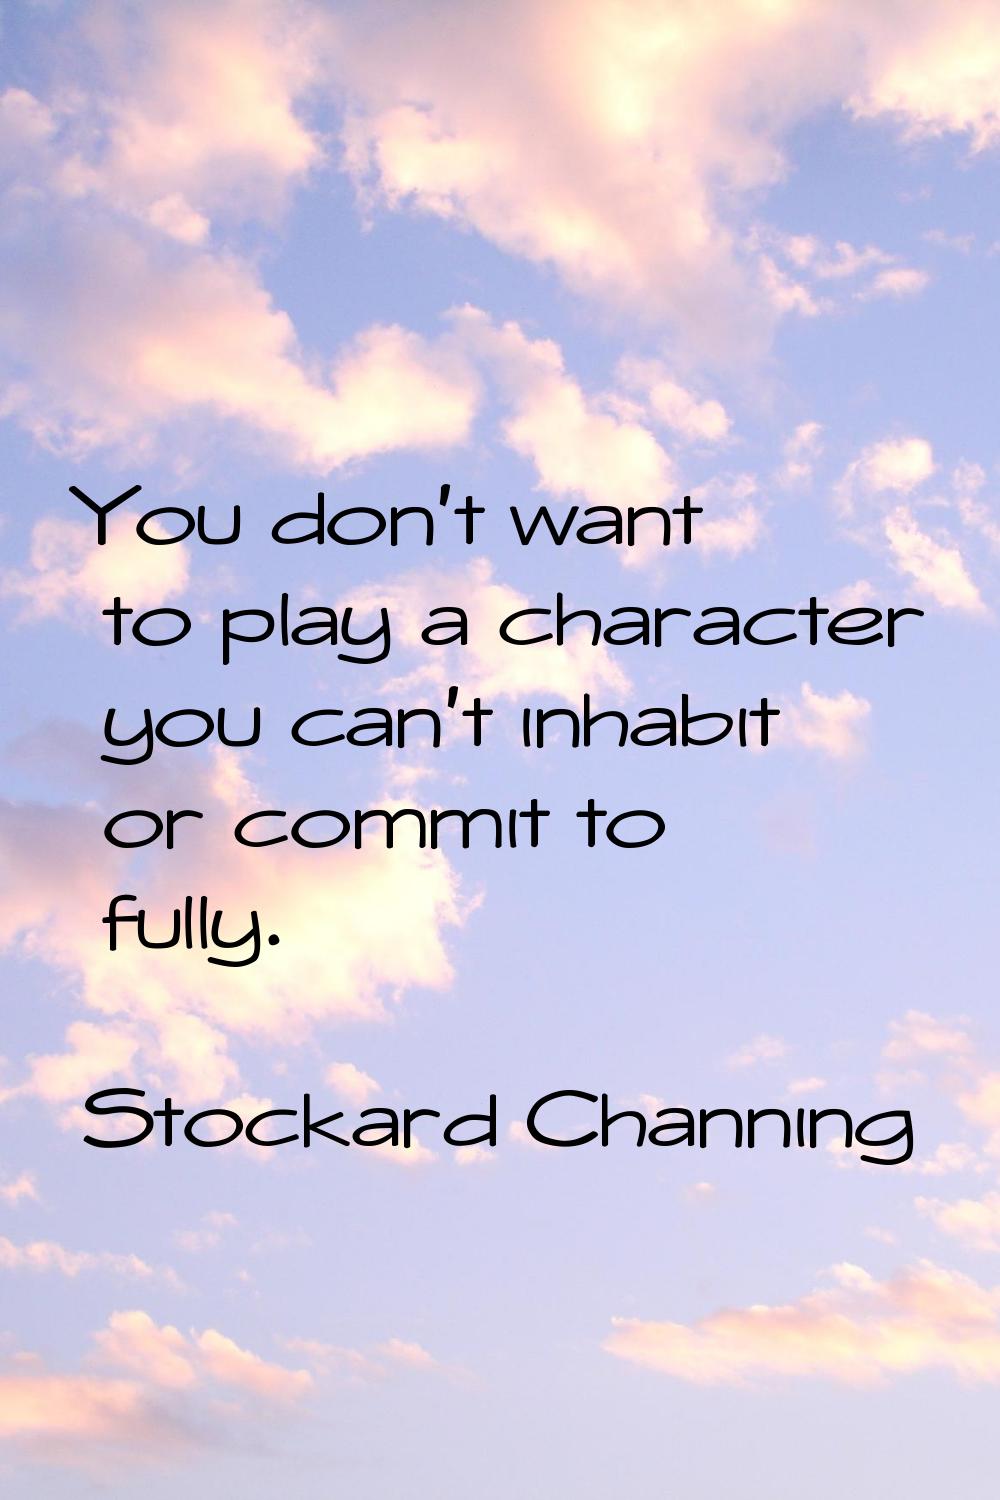 You don't want to play a character you can't inhabit or commit to fully.